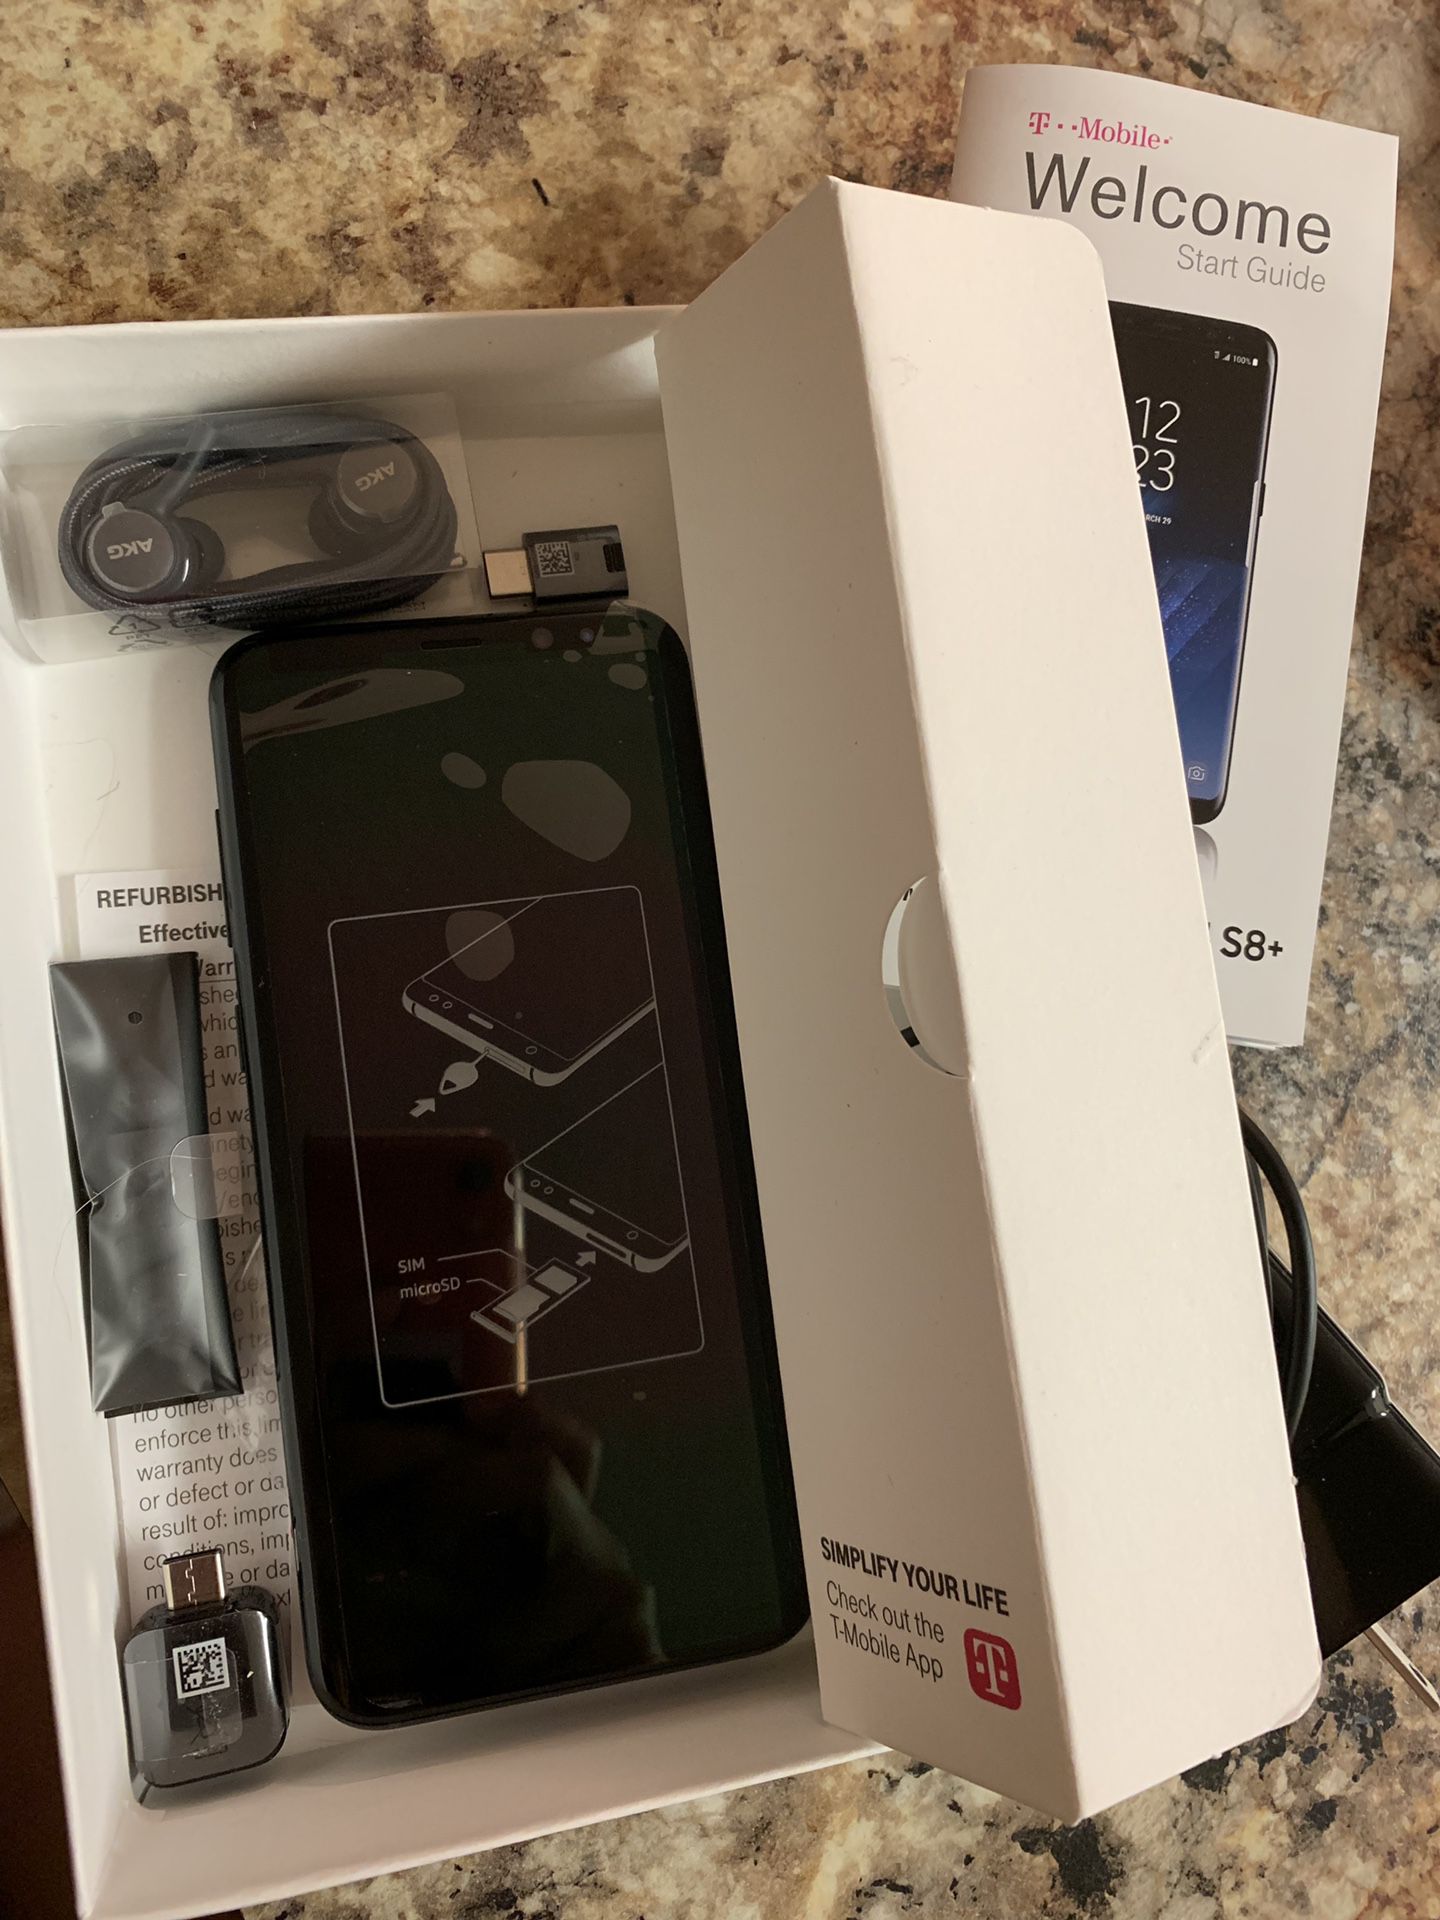 Samsung galaxy S8+ factory unlocked from T-mobile to use with any carrier. Brand new out of the box never used before.